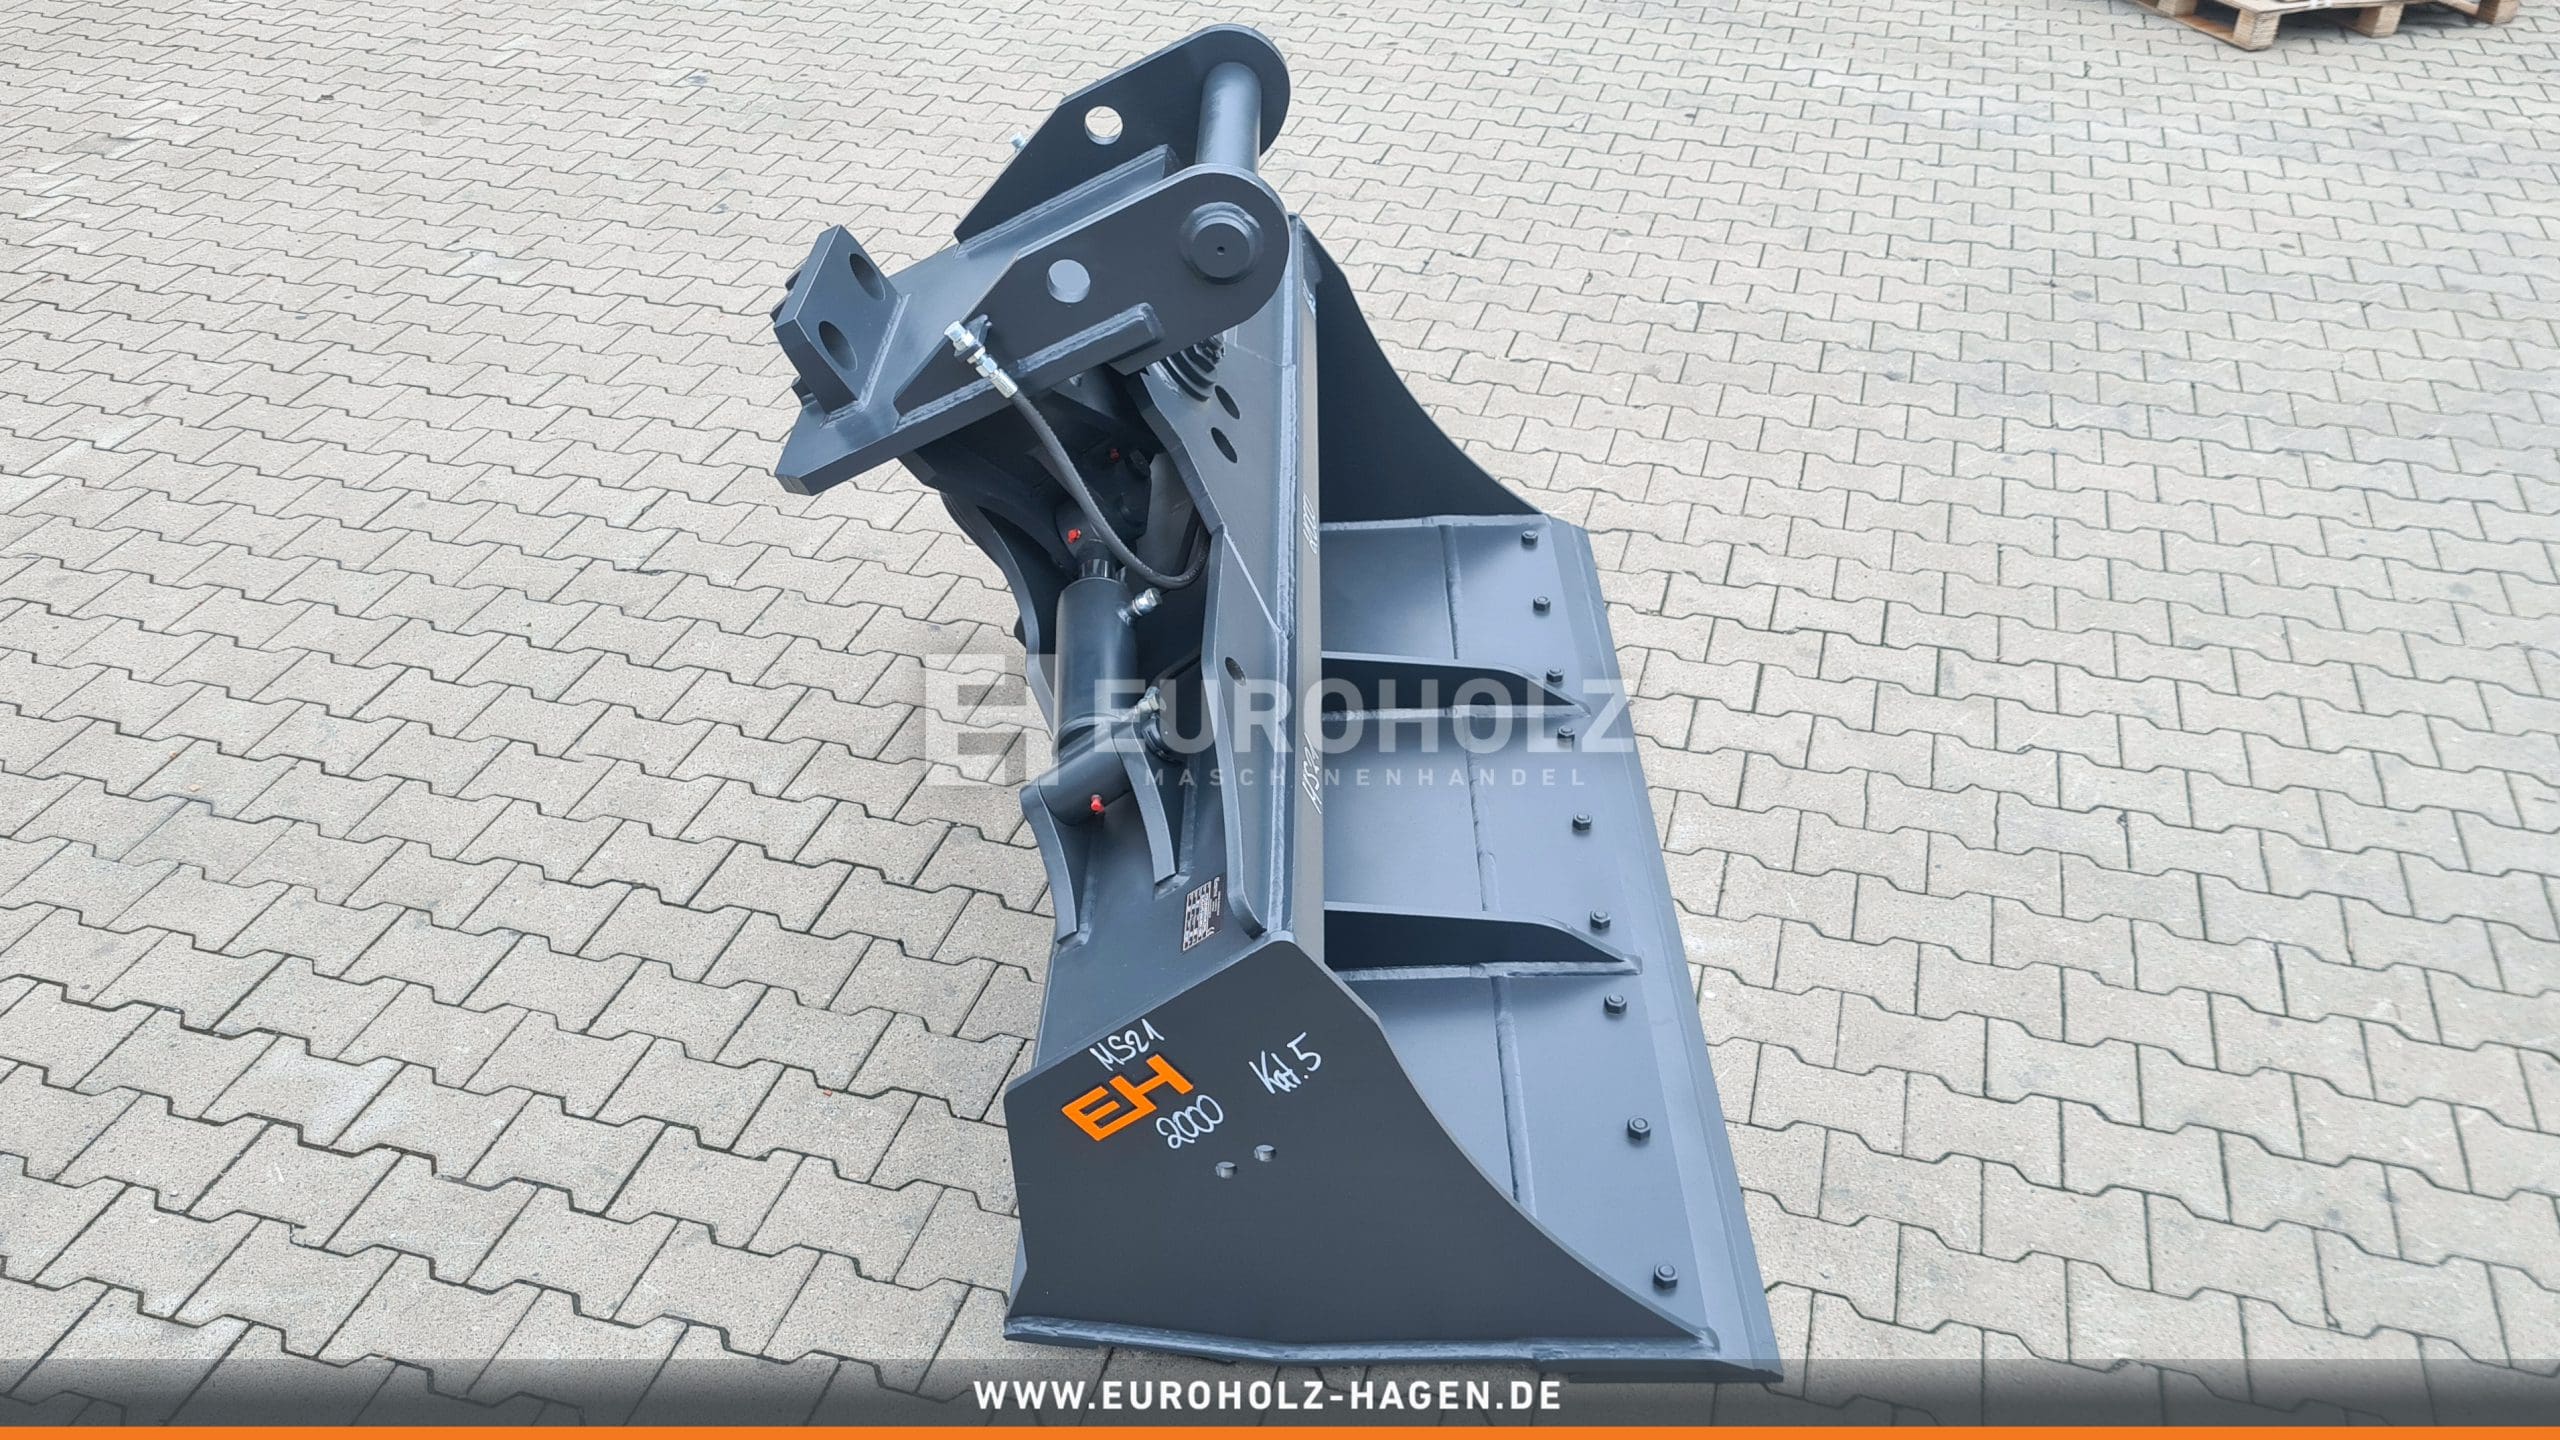 Hydraulic ditch cleaning bucket suitable for Lehnhoff MS21 / 2000 mm / cat. 5G / with bolt-on cutting edge